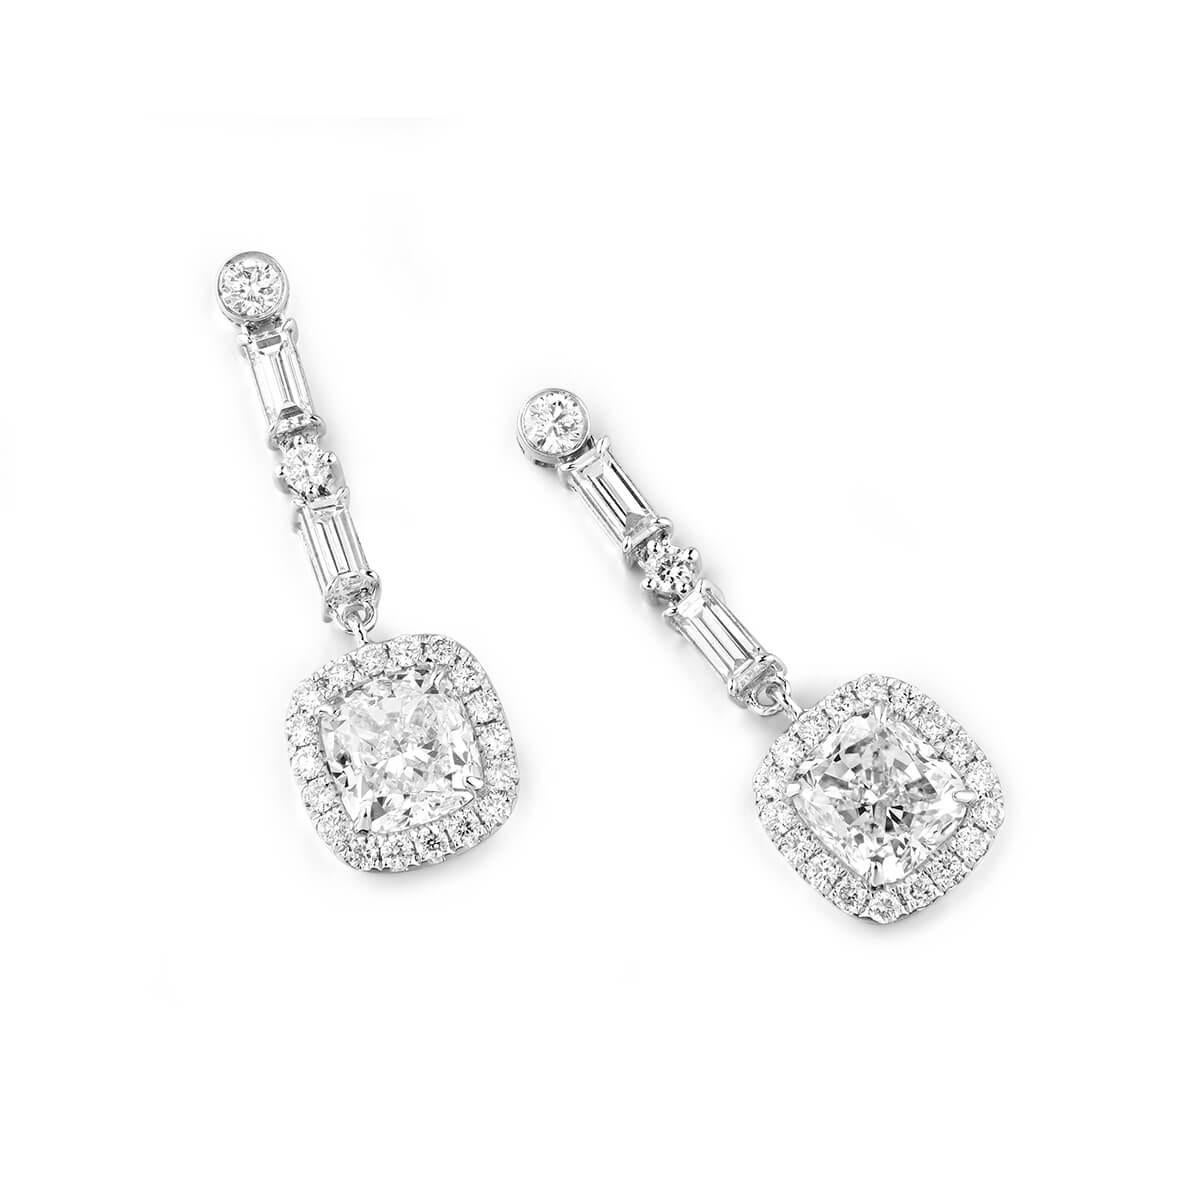 Modern GIA Certified White Gold Cushion and Baguette Cut Diamond Earrings, 2.72 Carat For Sale